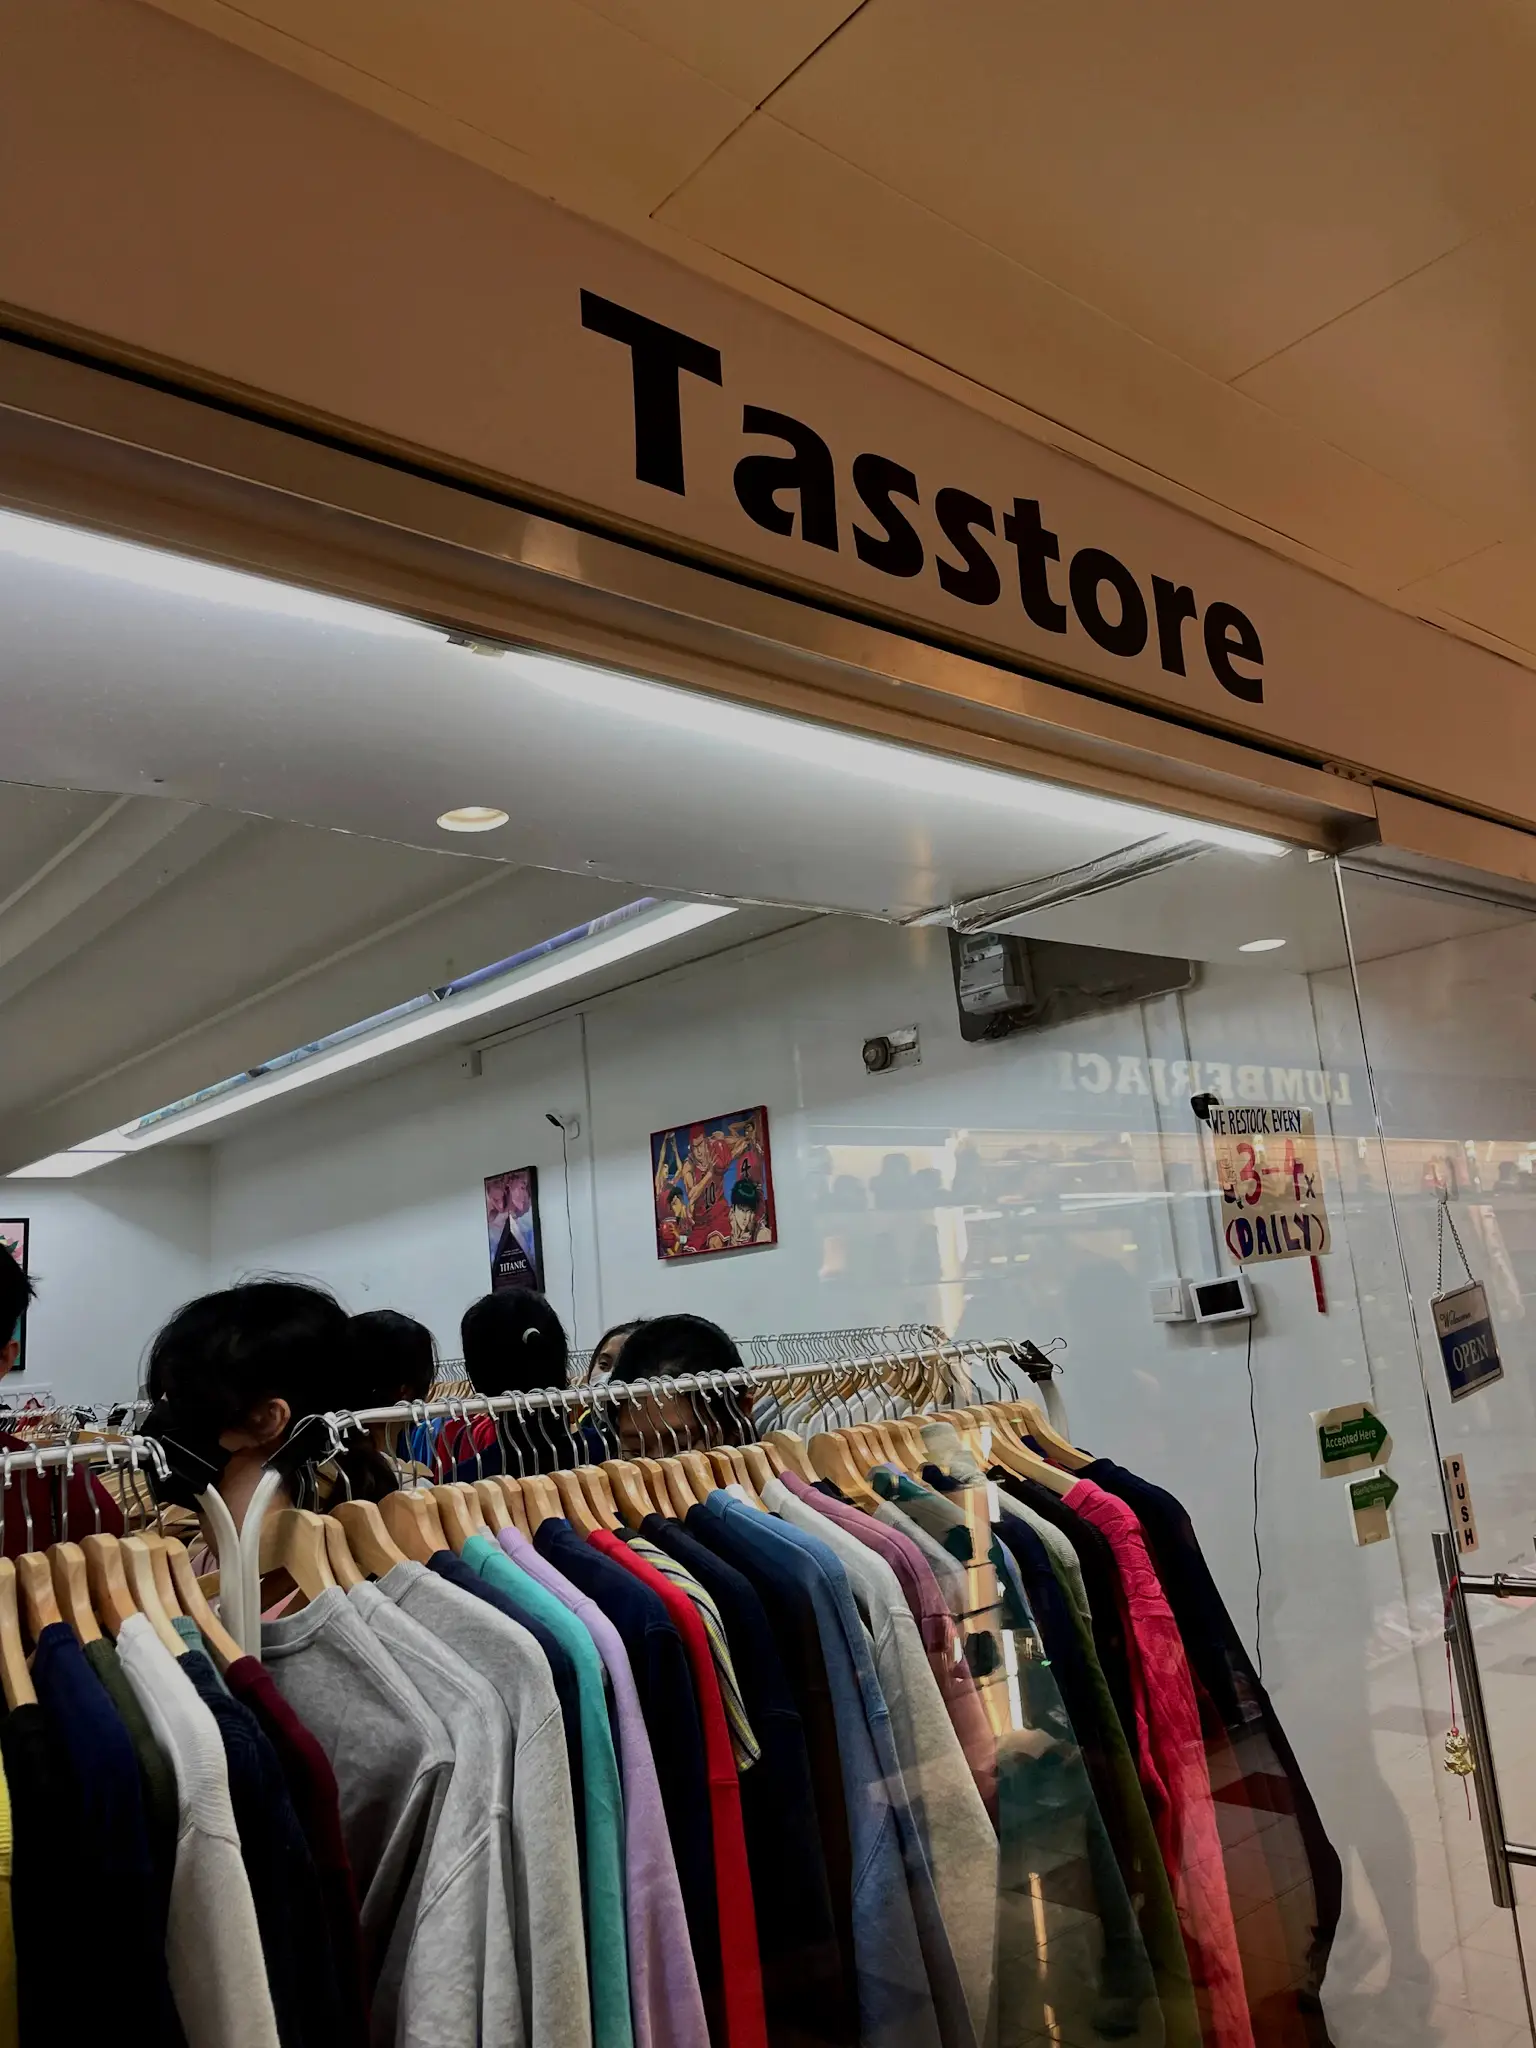 catch a vibe w tasstore 🤟🏻, Gallery posted by vio